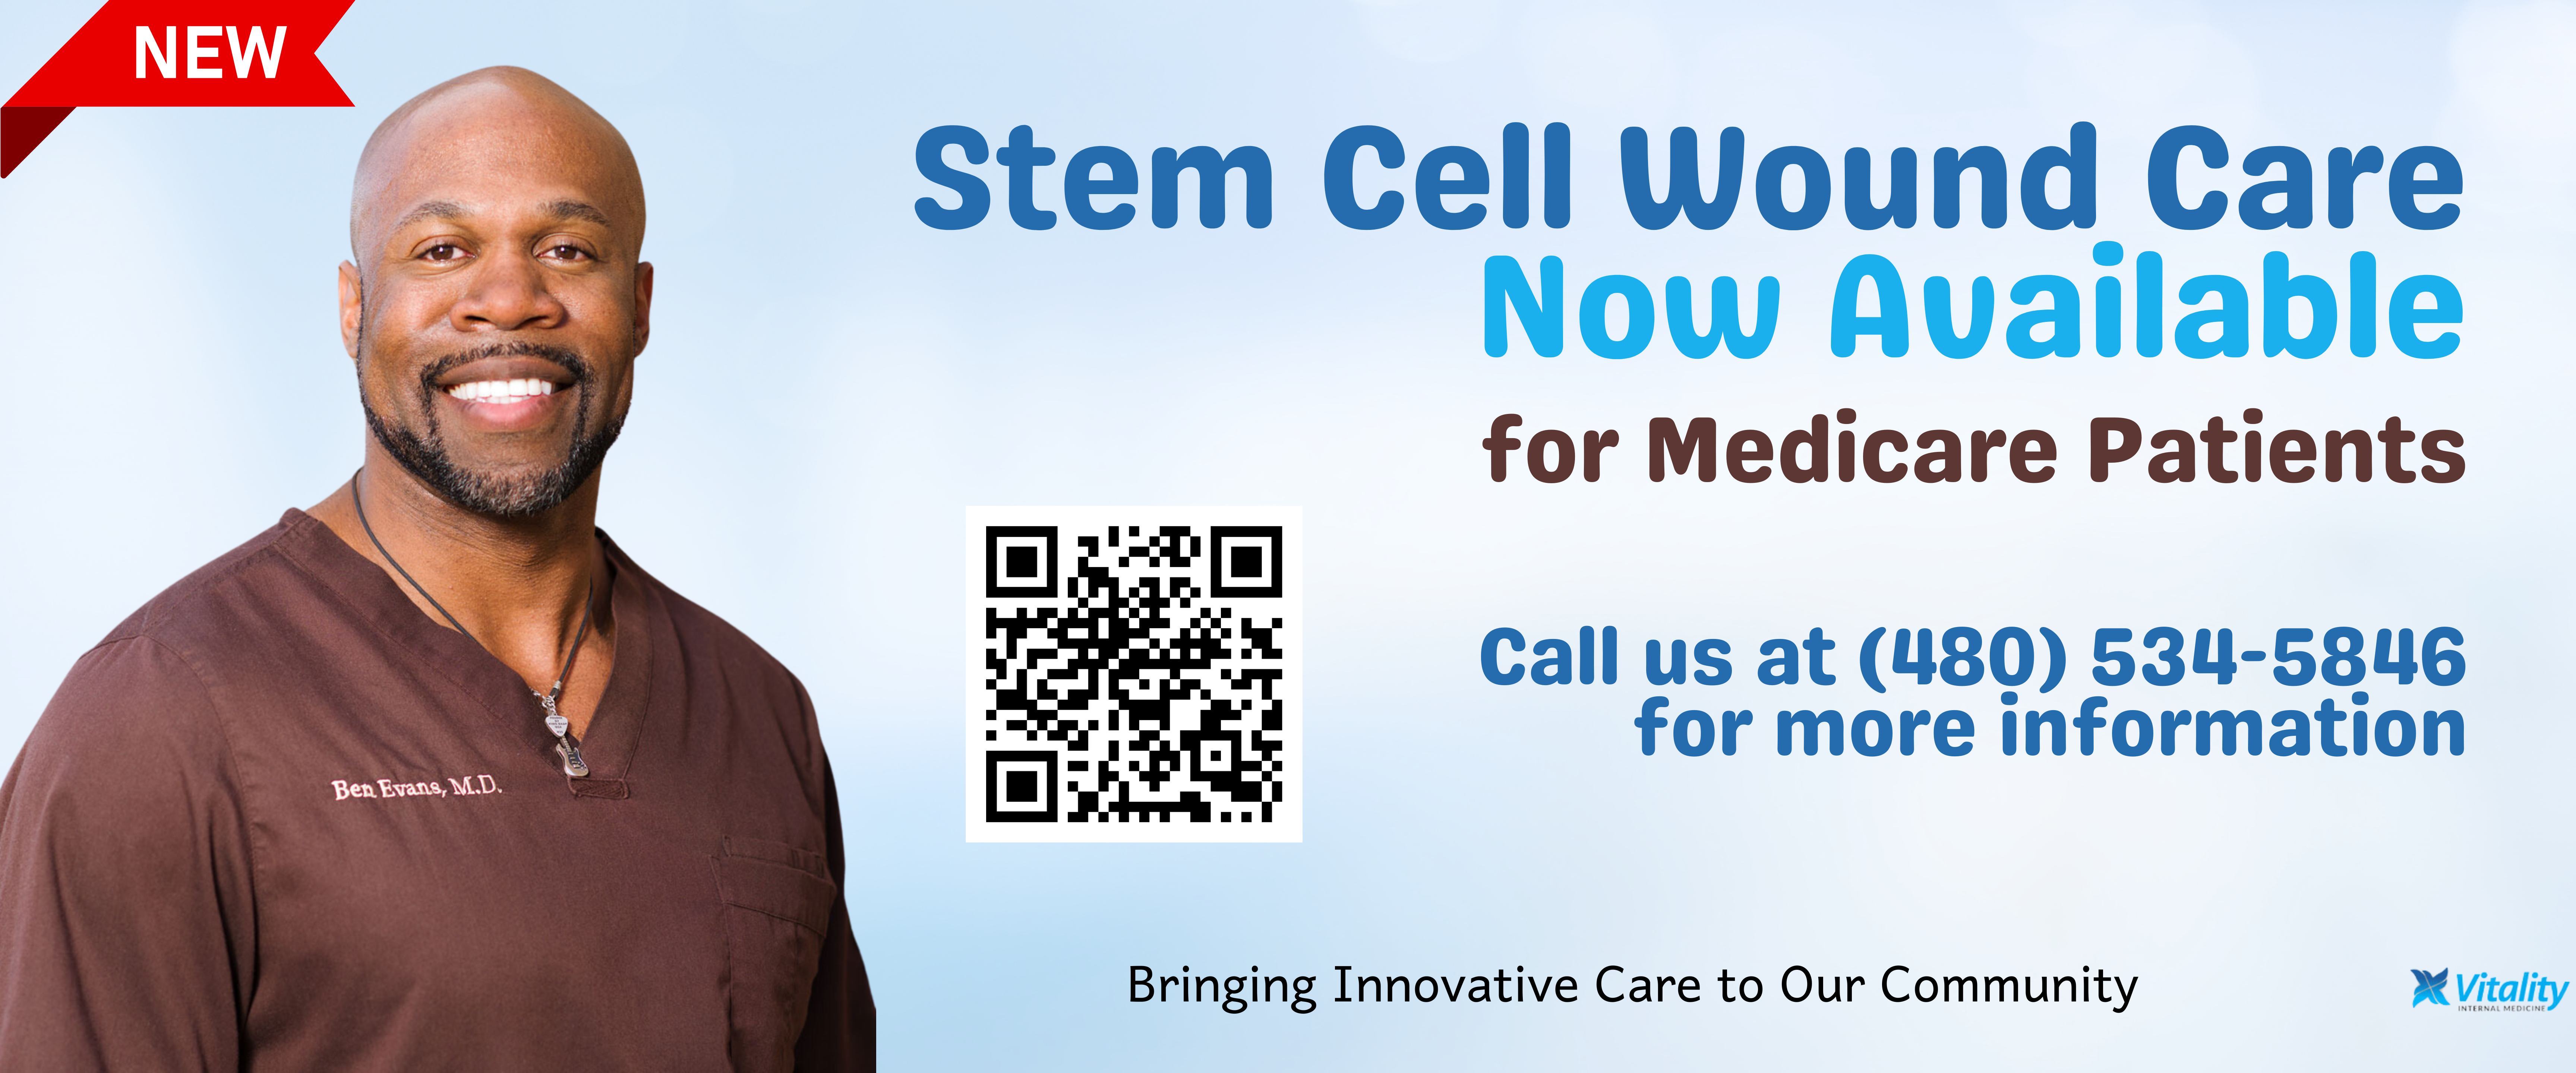 New! Stem Cell Wound Care Now Available for Medicare Patients